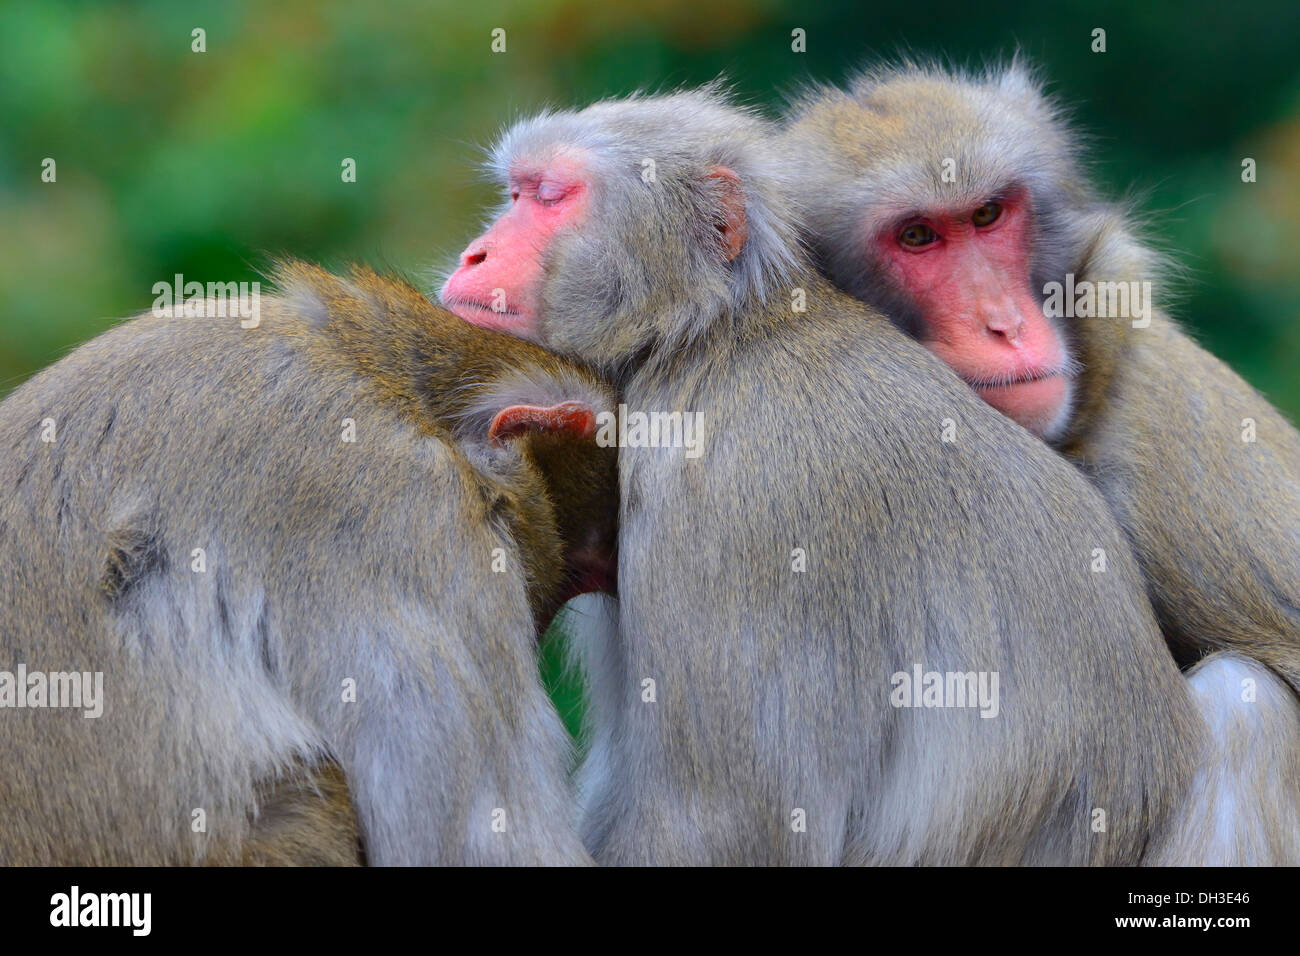 Japanese Macaques (Macaca fuscata), Baden-Württemberg, Germany Stock Photo